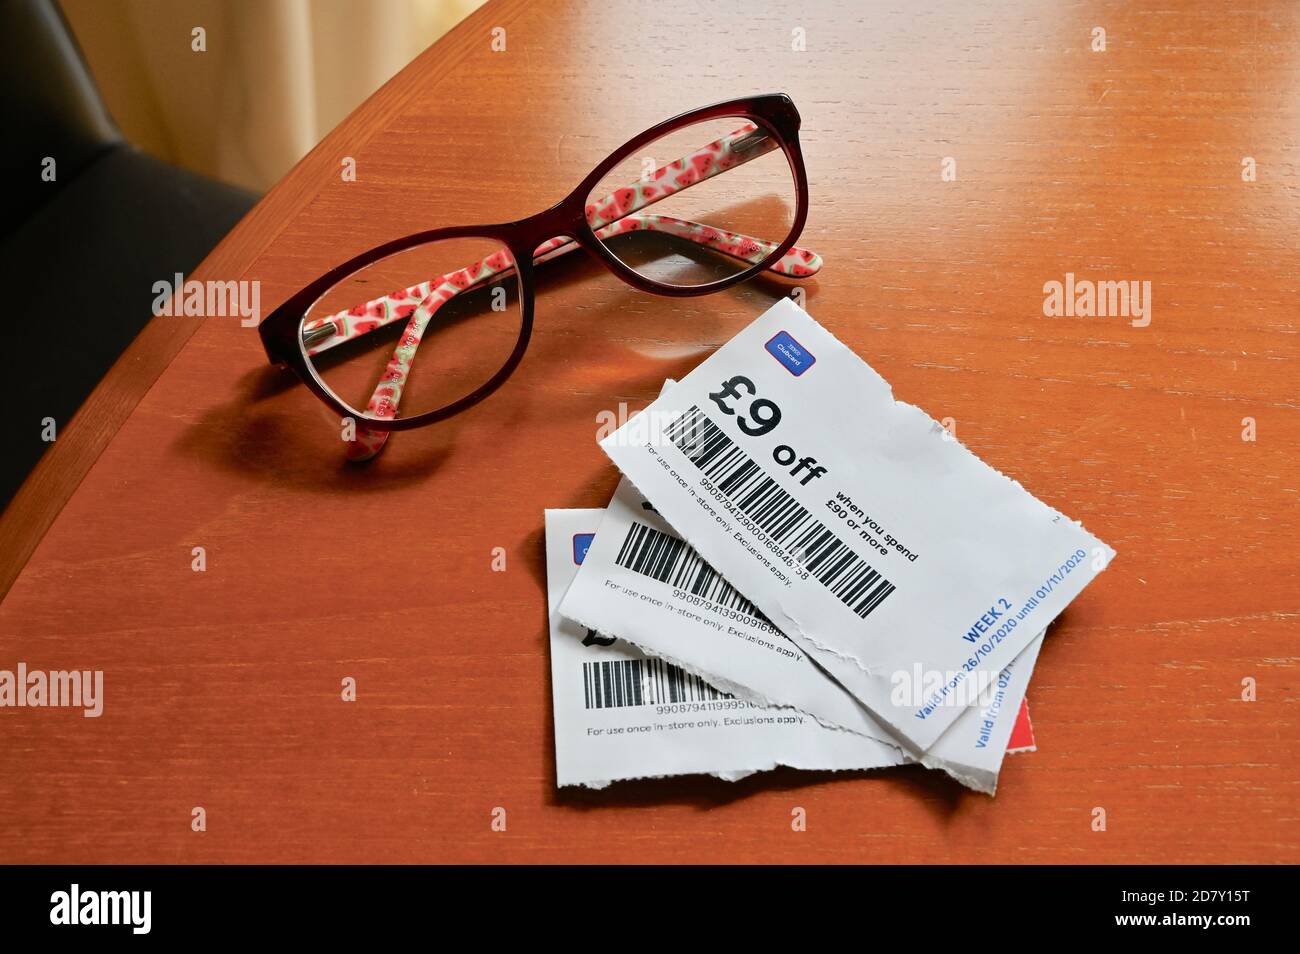 Tesco money saving vouchers left on the table with a pair of glasses. Stock Photo